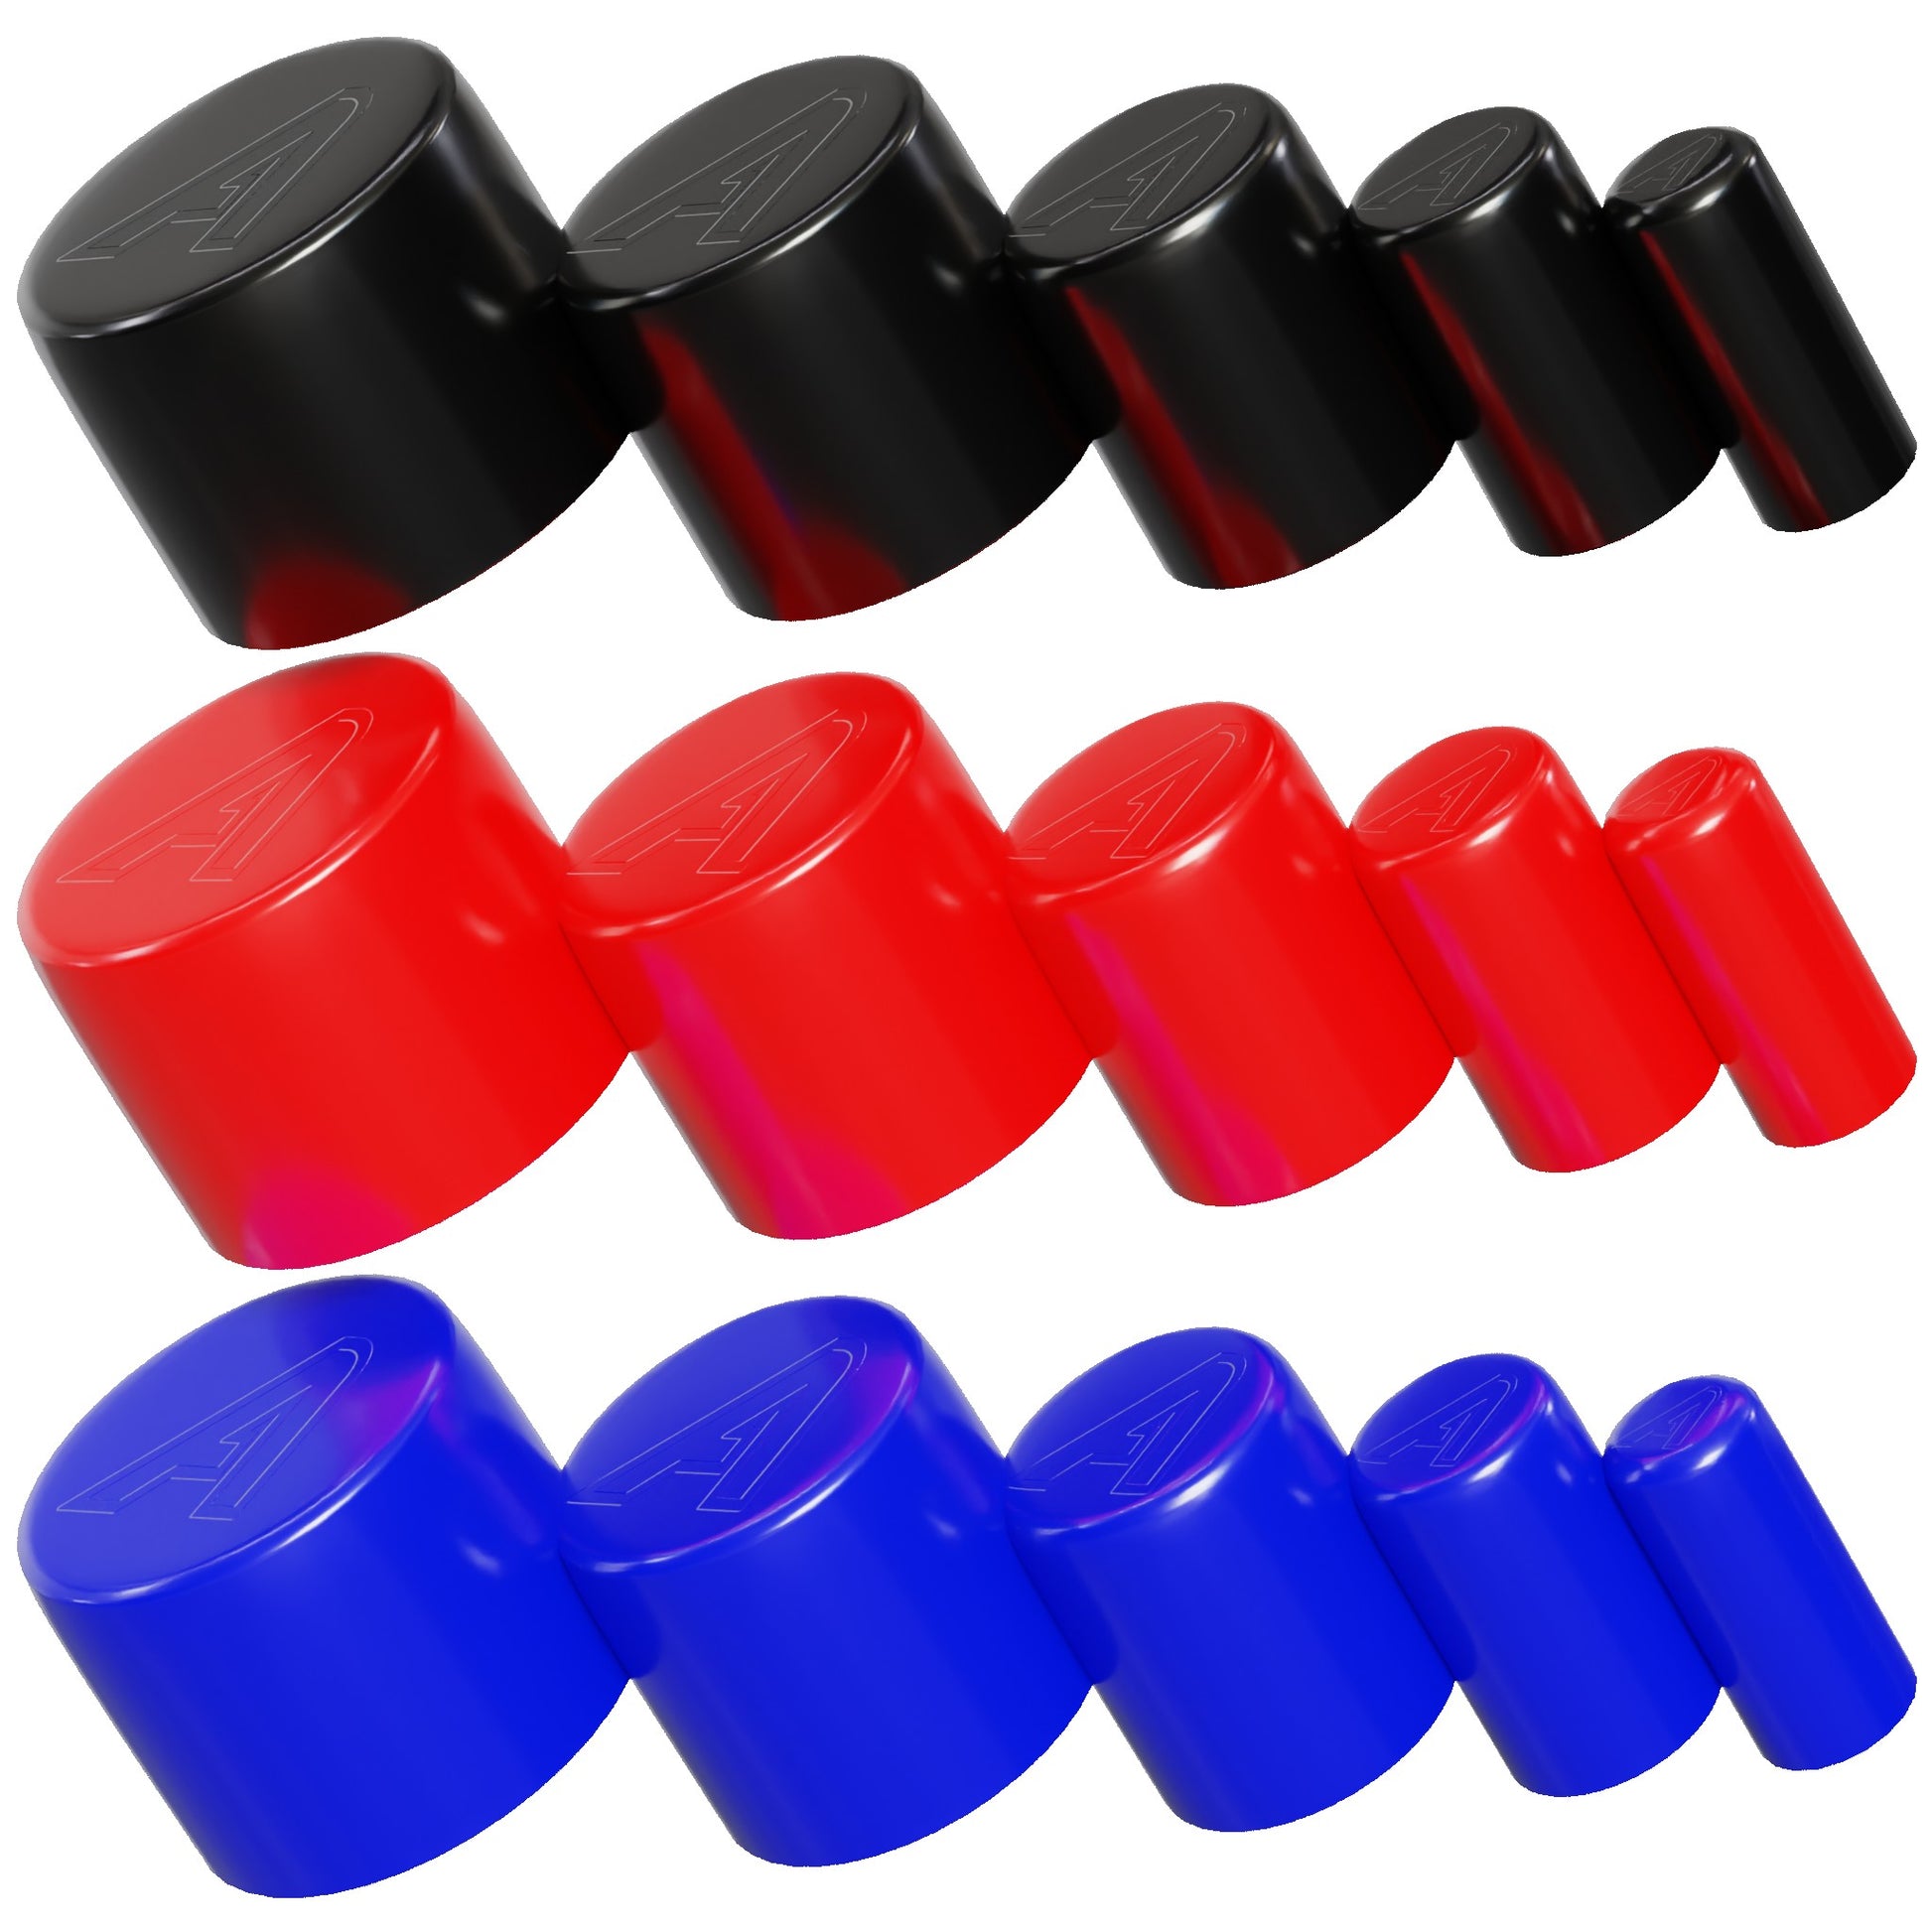 Silicone Rubber Caps Motor Vehicle Engine Parts Auto Silicone Hoses   